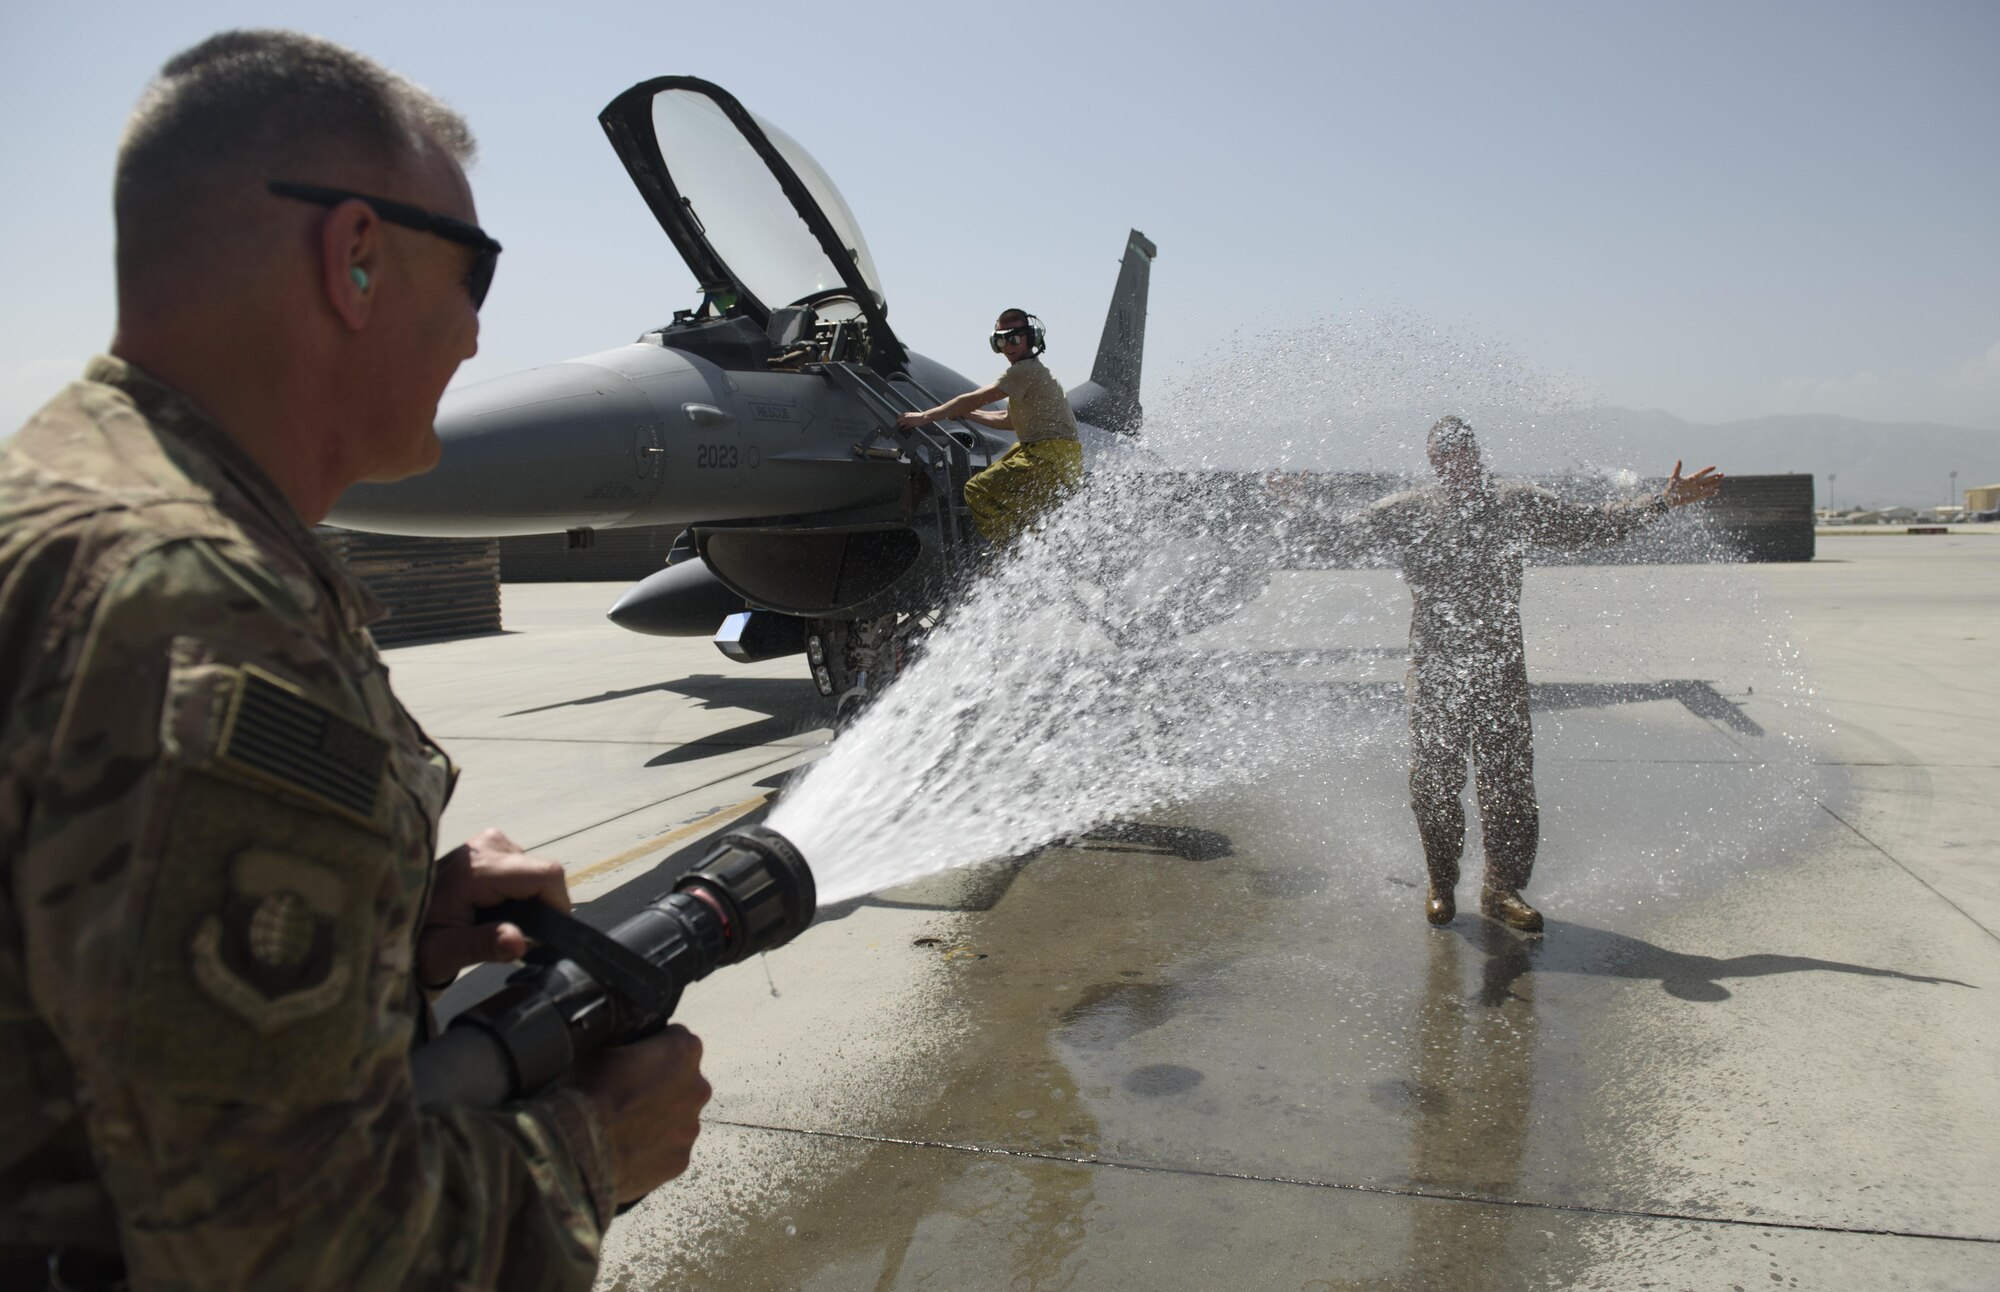 Chief Master Sgt. Peter Speen, command chief of the 455th Air Expeditionary Wing, hoses down Brig. Gen. Jim Sears at Bagram Airfield, Afghanistan, May 22, 2017. Sears, commander of the 455th AEW, conducted his fini flight out of Bagram Airfield. The fini flight is a time-honored military aviation tradition marking the last flight of a commander's tour. (U.S. Air Force photo by Staff Sgt. Benjamin Gonsier)